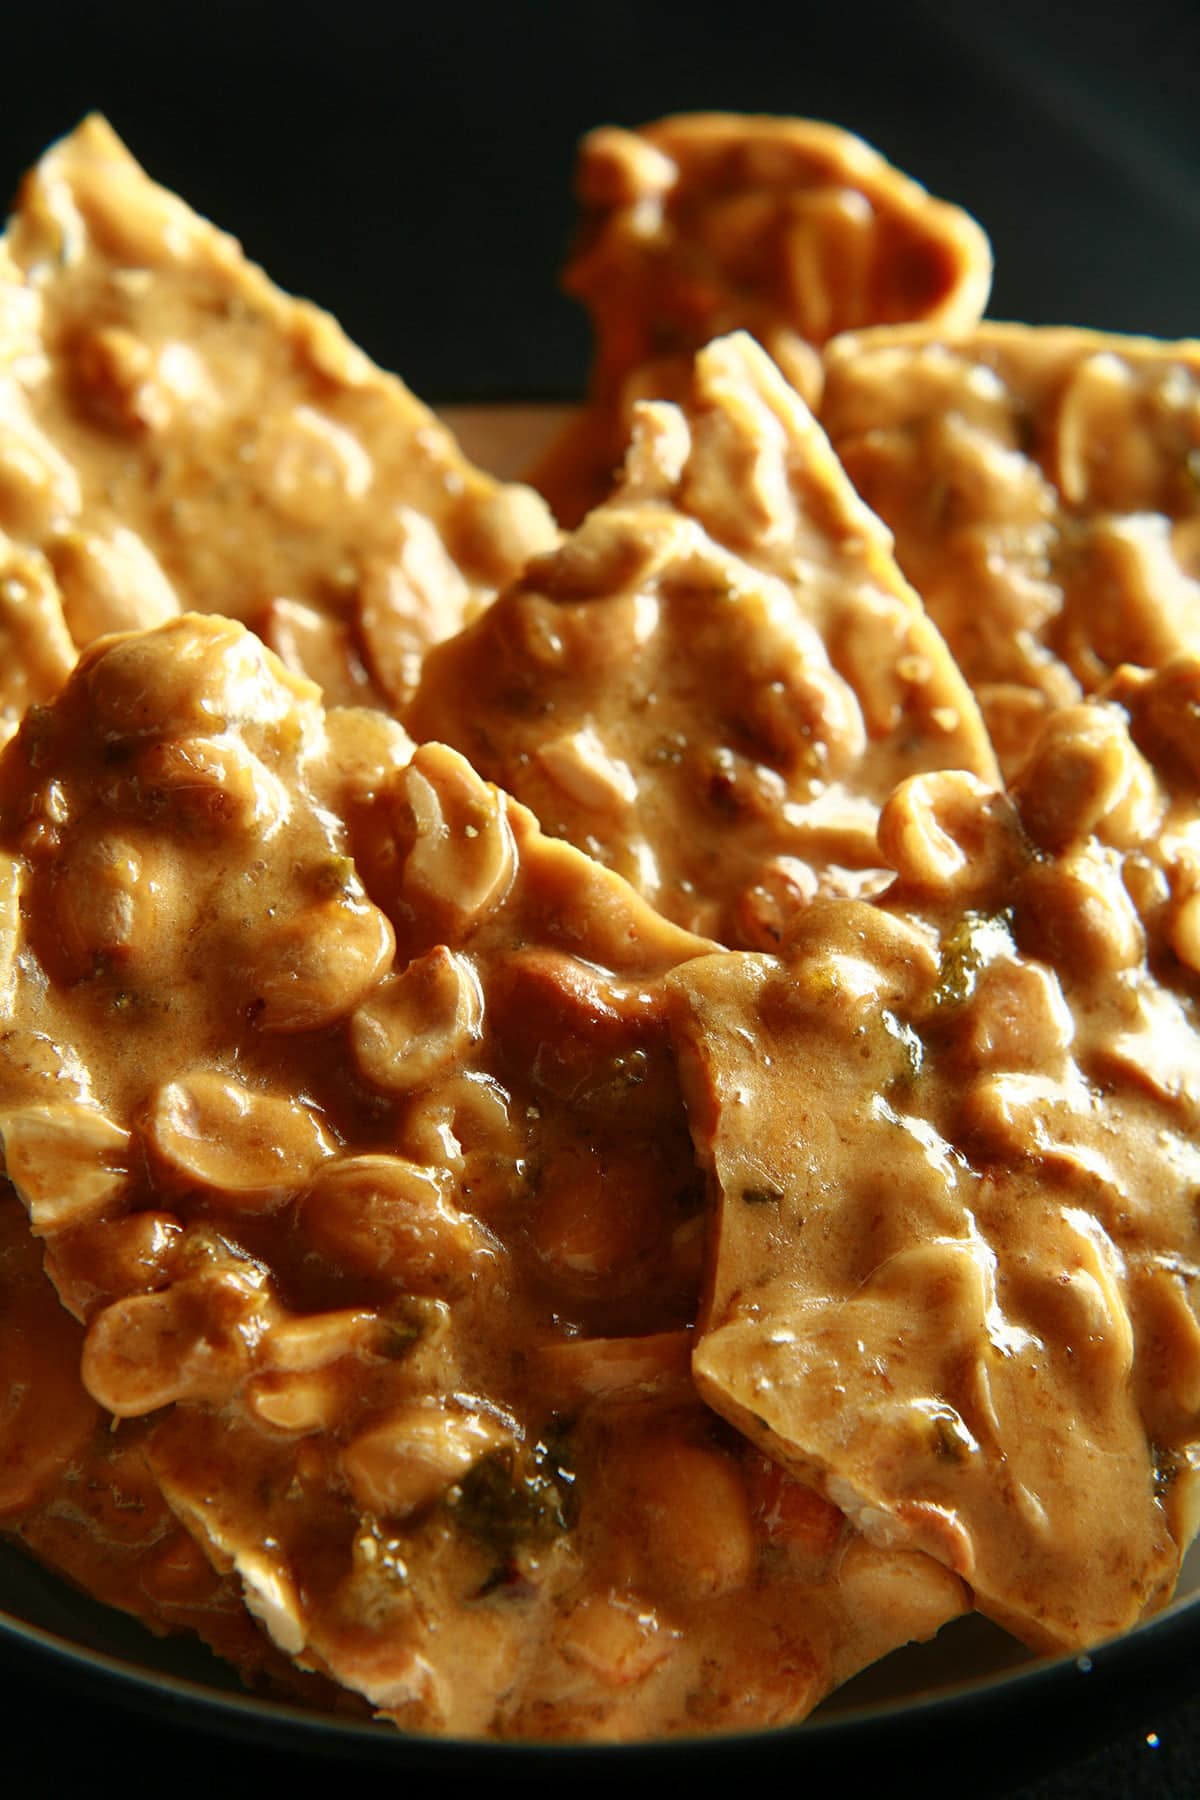 A close up view of peanut brittle with green flecks throughout - jalapeno pieces!